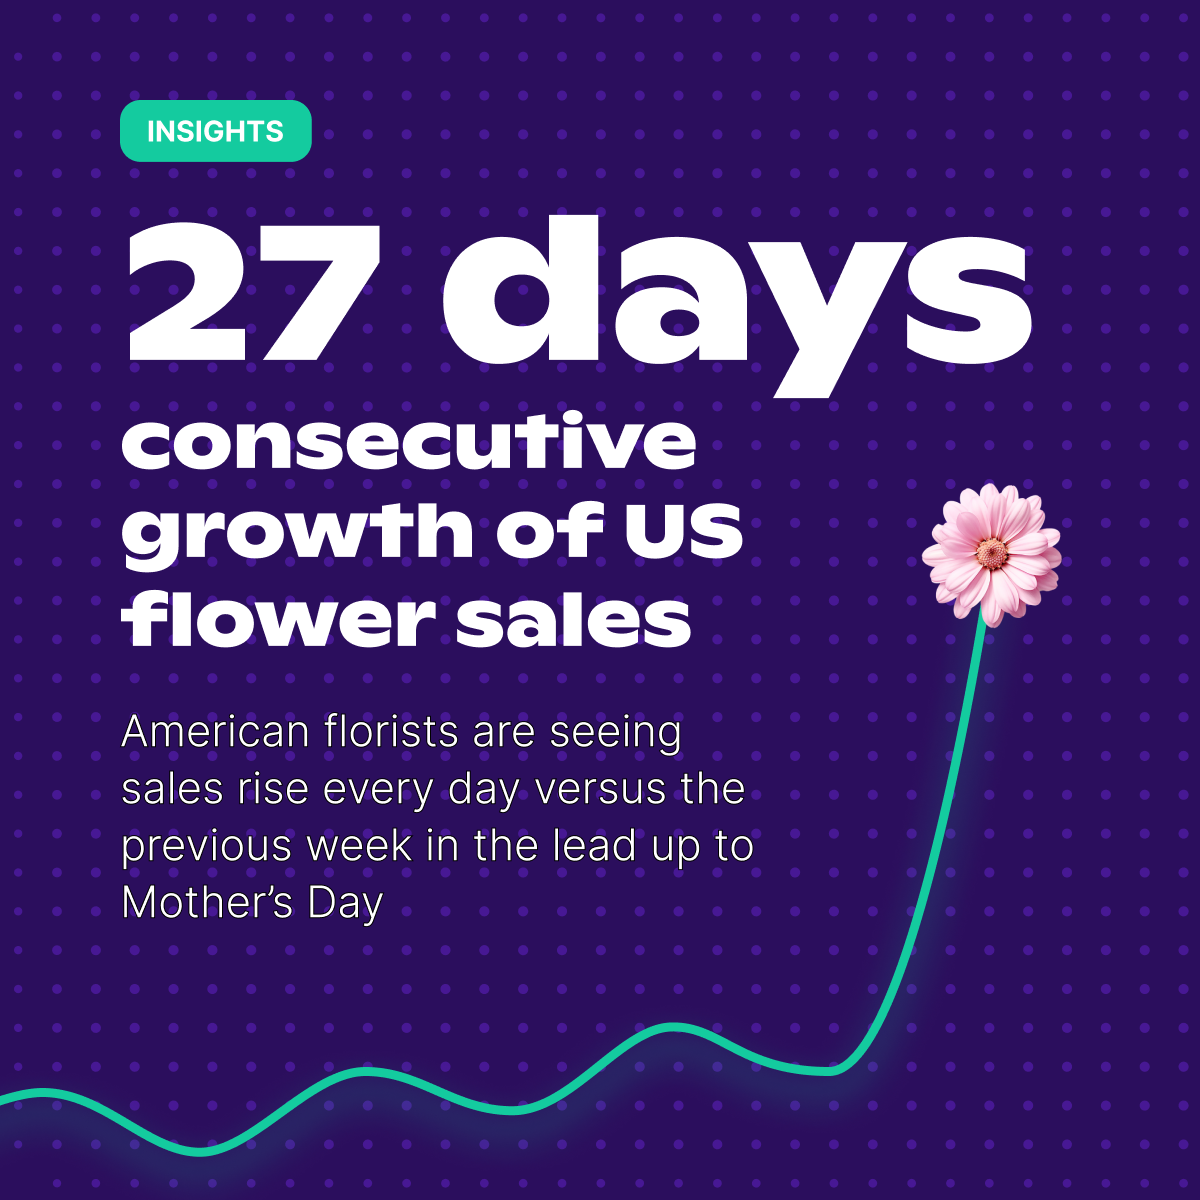 US flower sales grow 27 days in a row